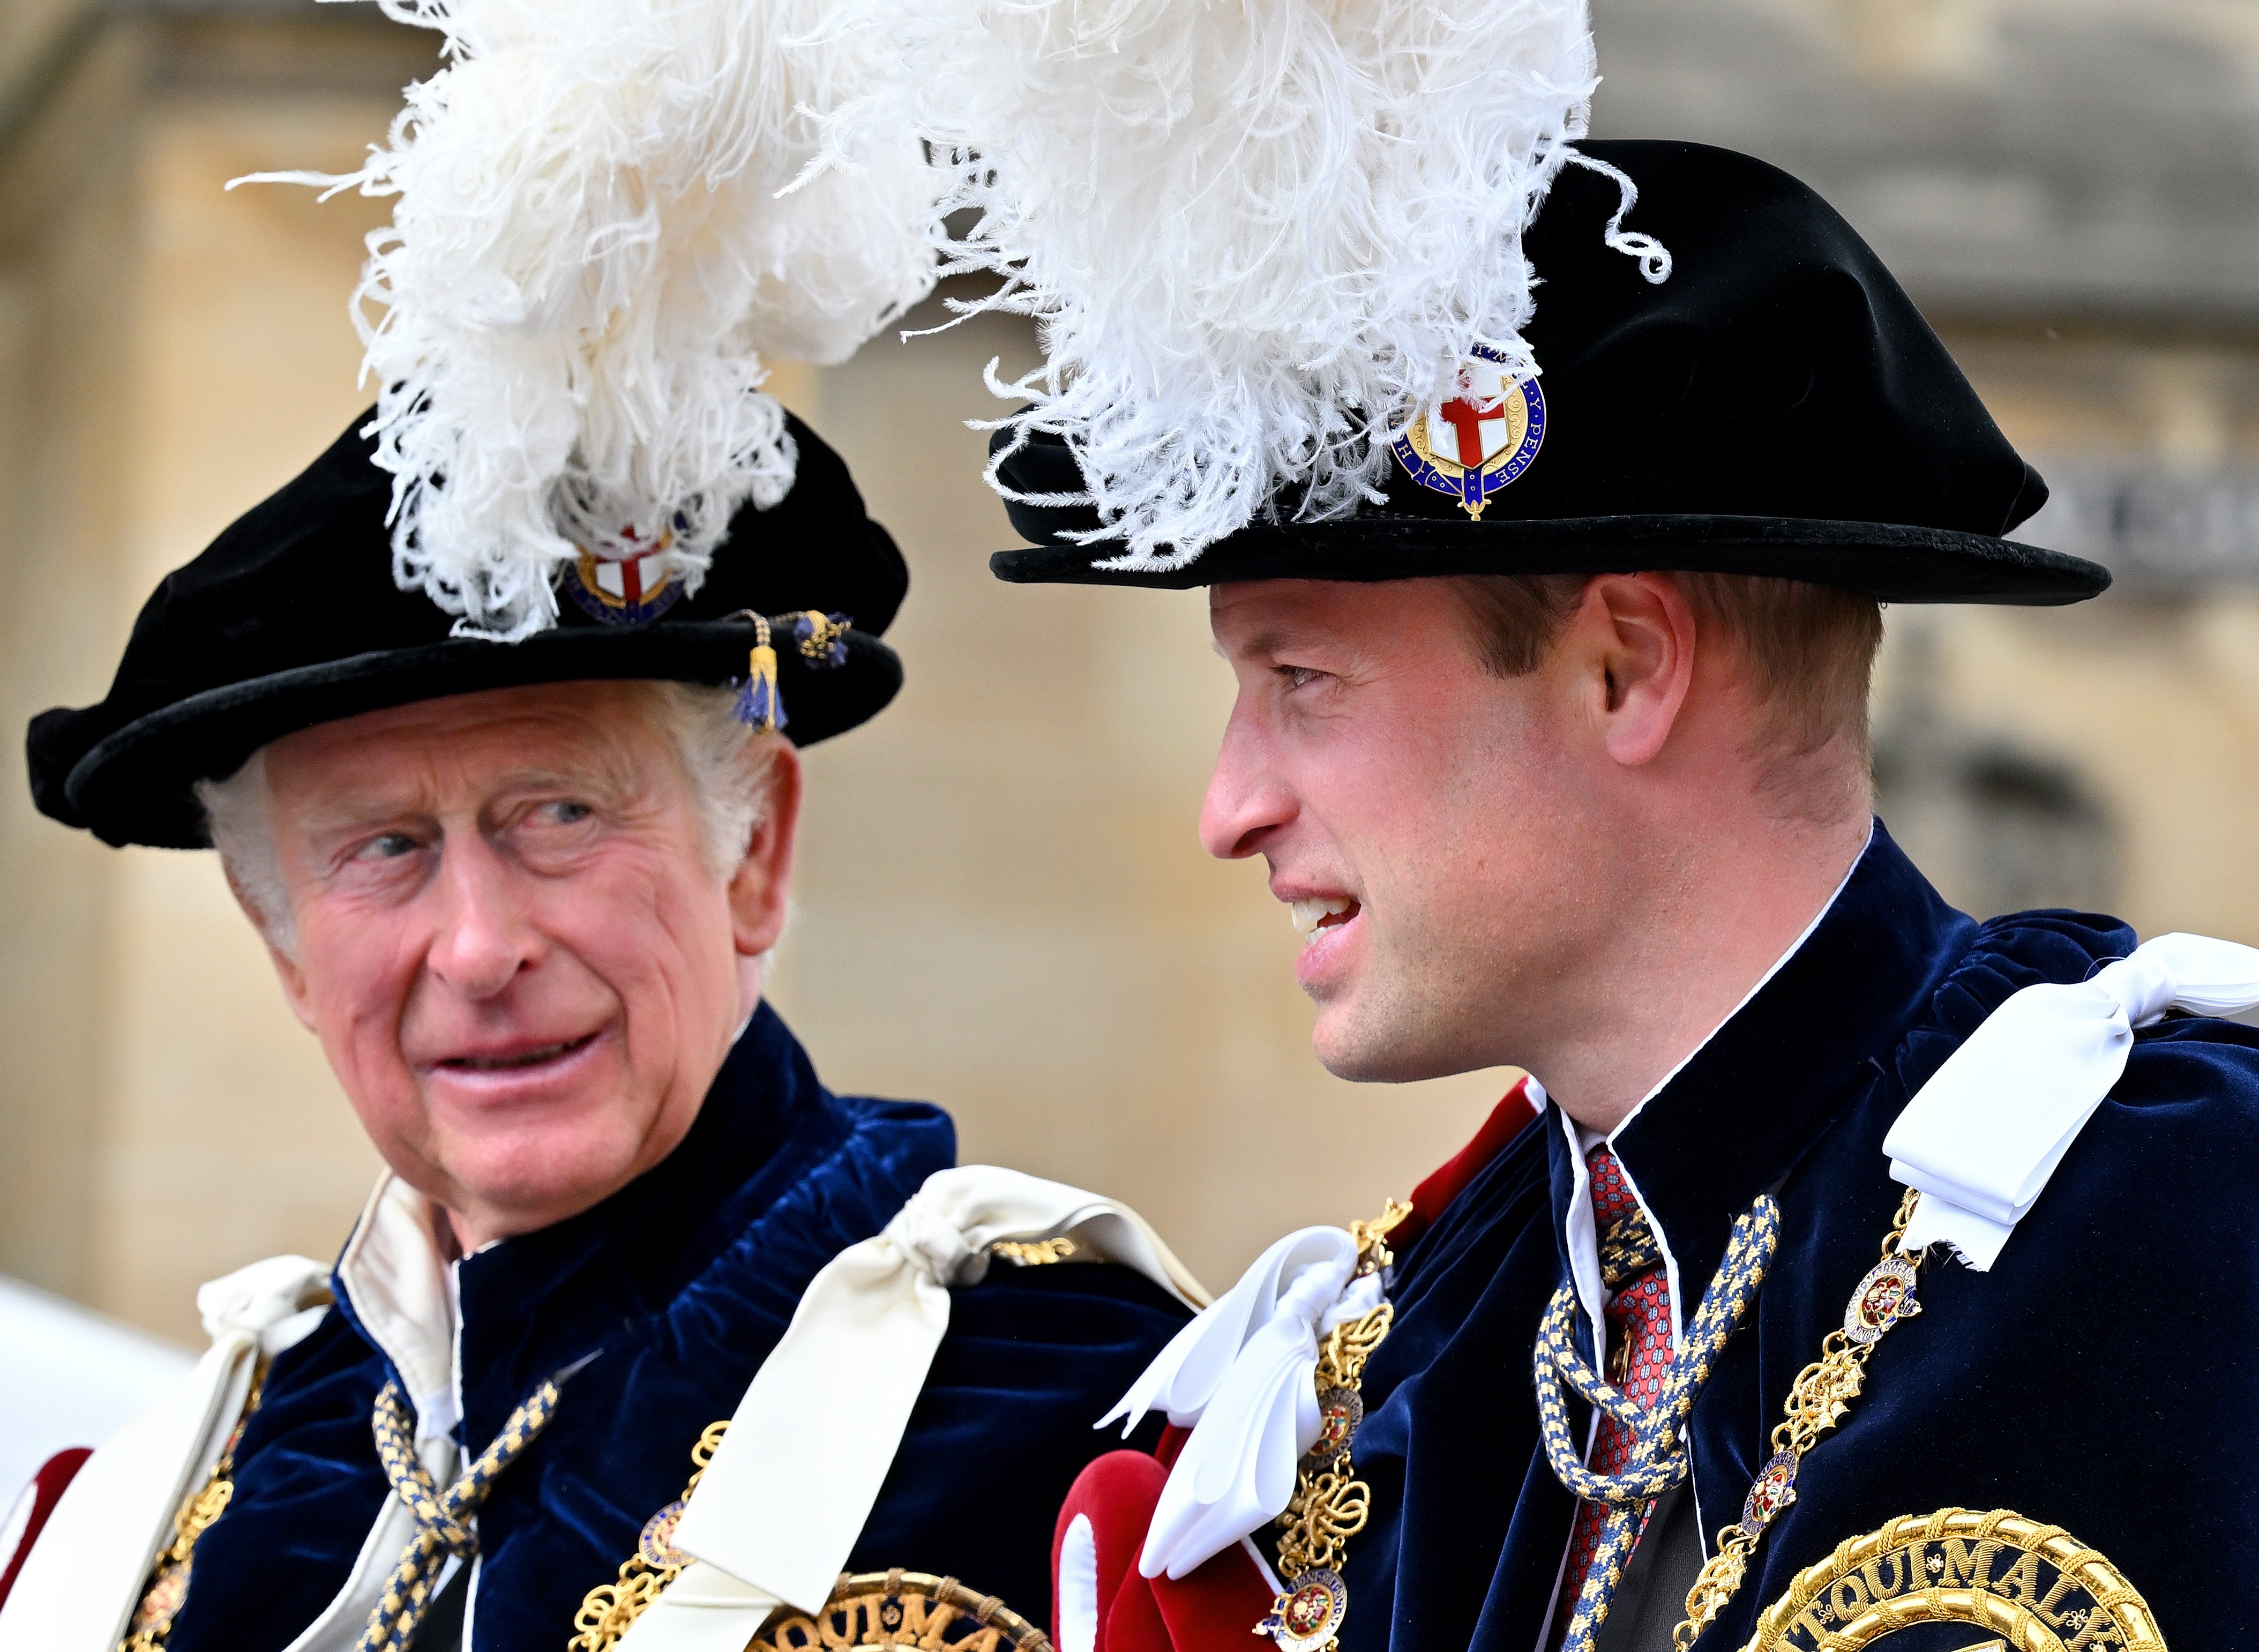 Prince Charles, now-King and Prince William, attend The Order of The Garter service at St George's Chapel, Windsor Castle on June 13, 2022 in Windsor, England. | Source: Getty Images